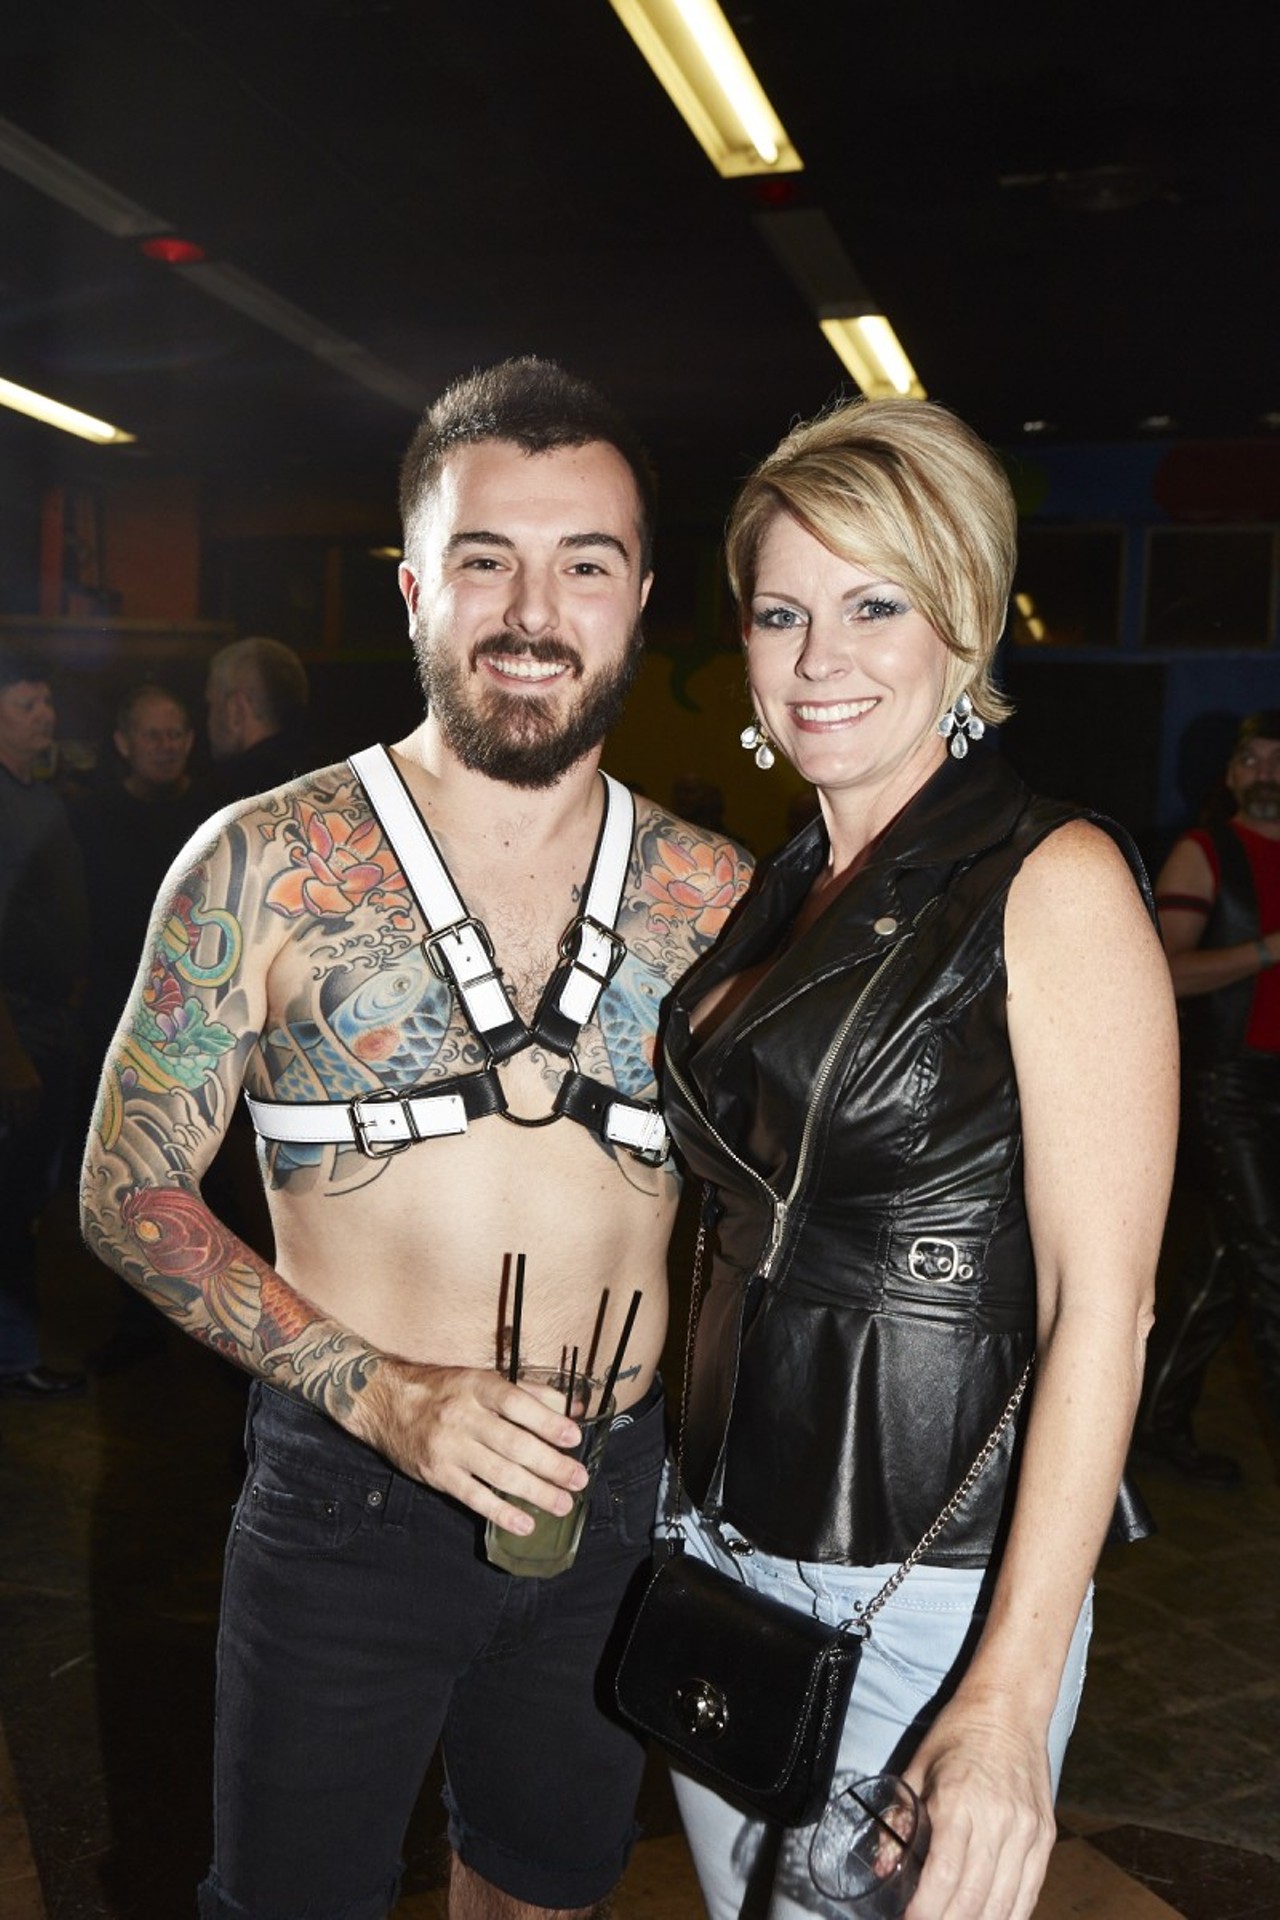 Eddie Schorn and Michelle "Dos" pose for a photo. Eddie is part of the fashion show that showcases leather artist Jerry of Branded Leather.